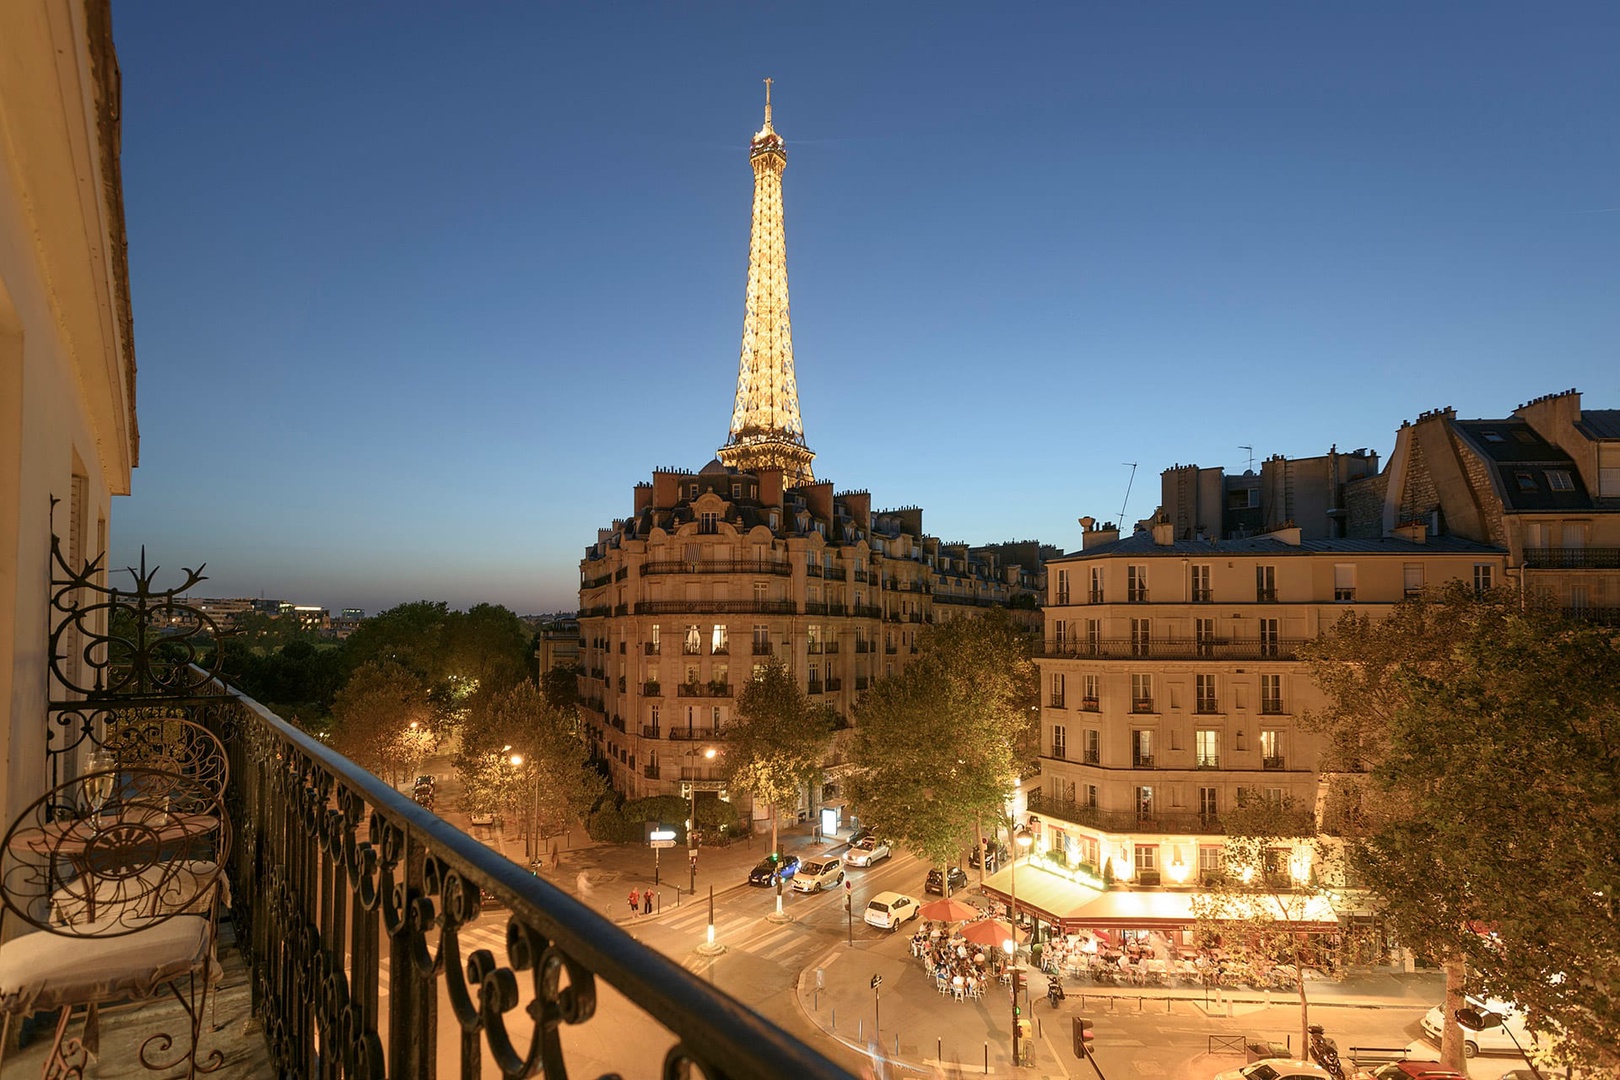 Step out on the balcony for an unforgettable Eiffel Tower view!